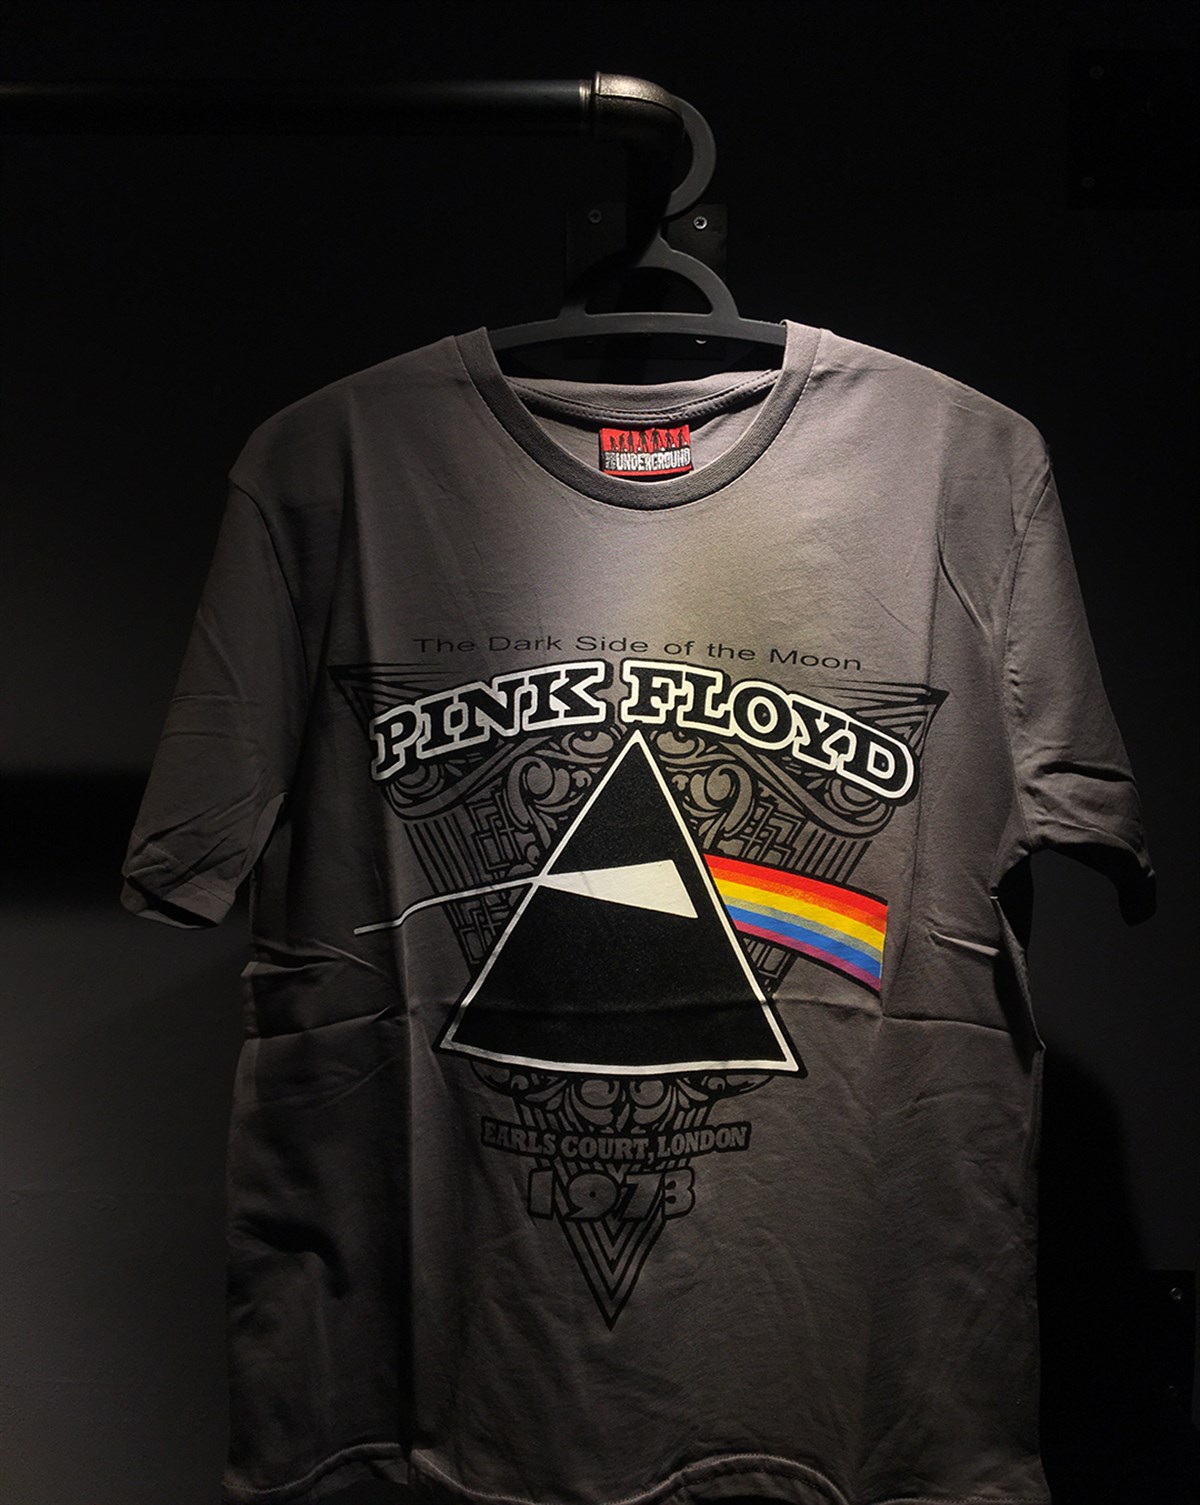 PINK FLOYD The Dark Side of the Moon T-Shirt